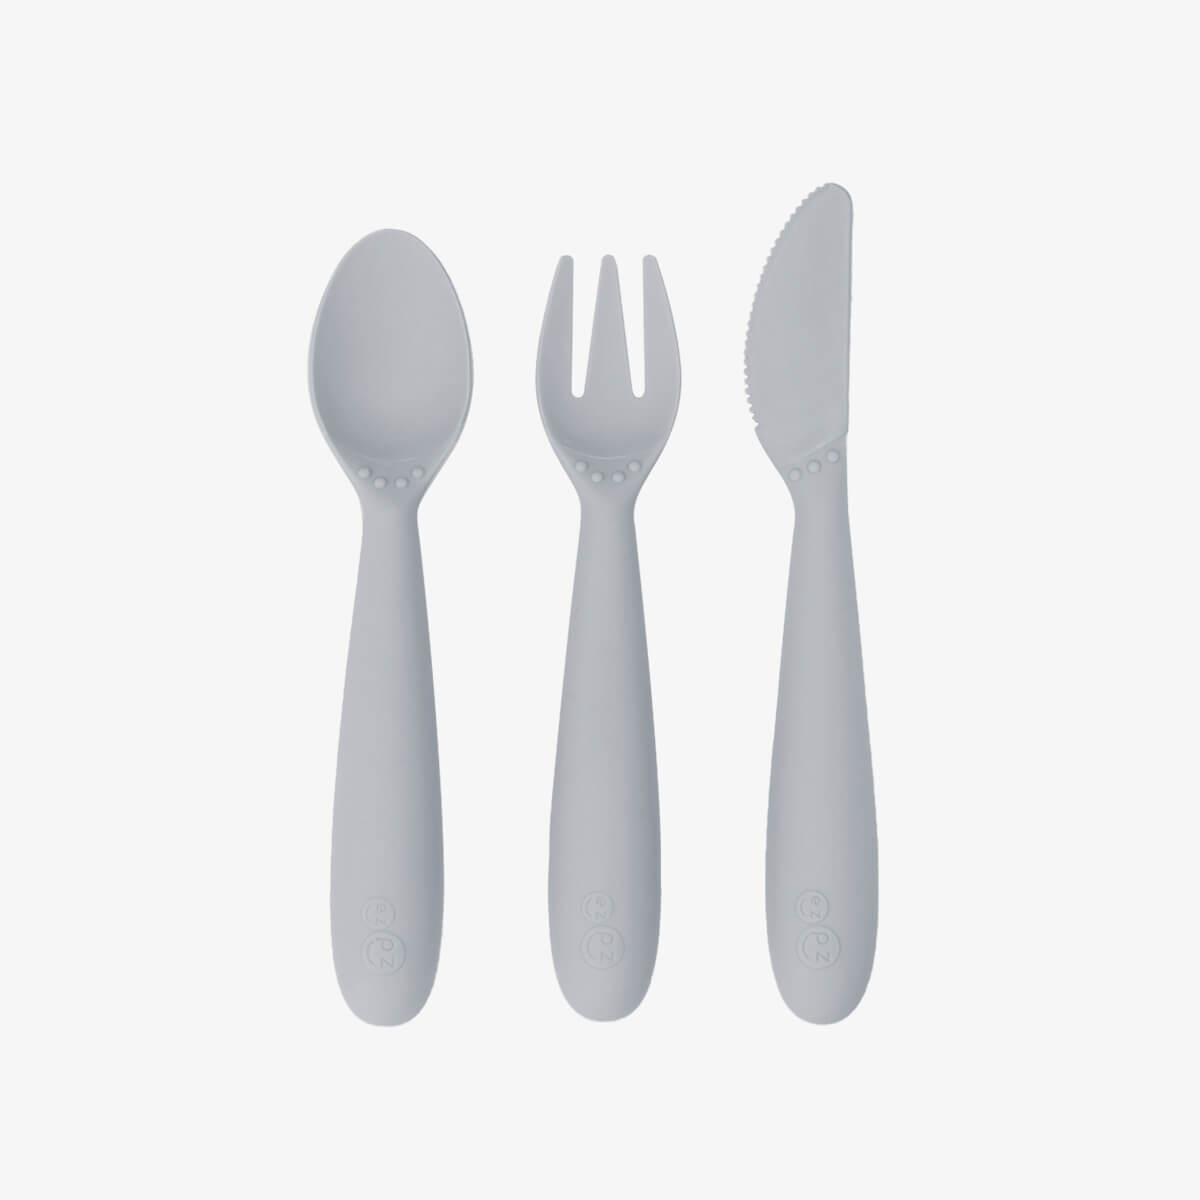 spoon and fork and knife